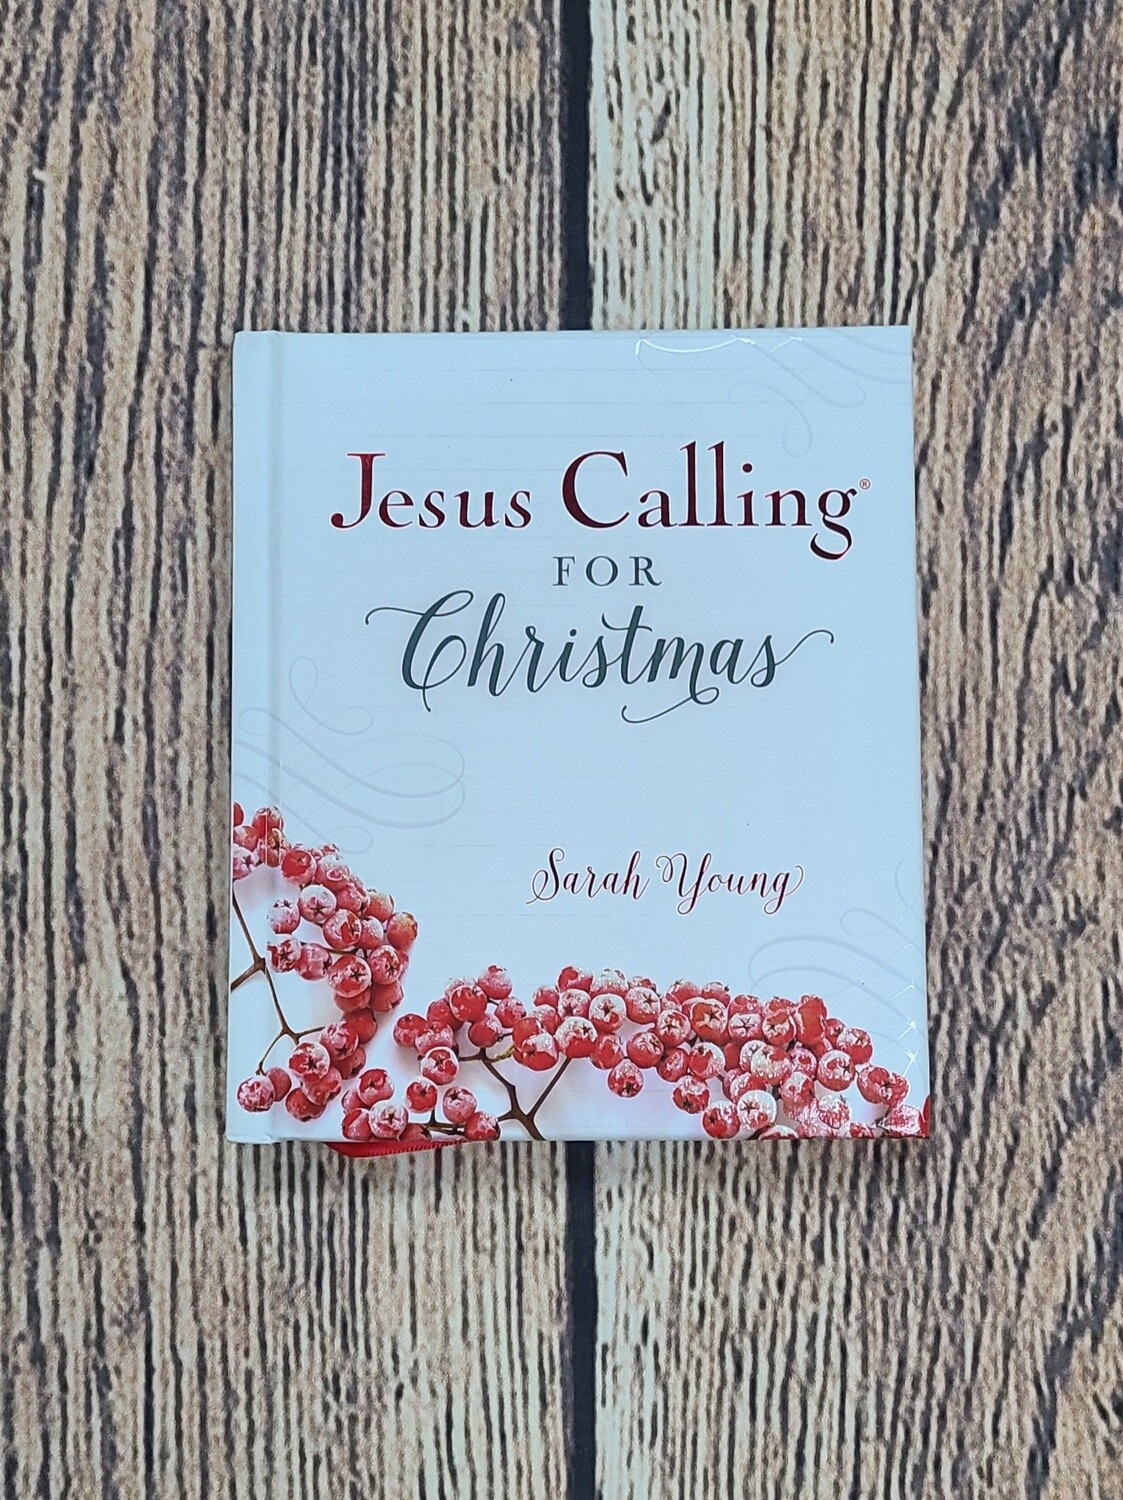 Jesus Calling for Christmas by Sarah Young